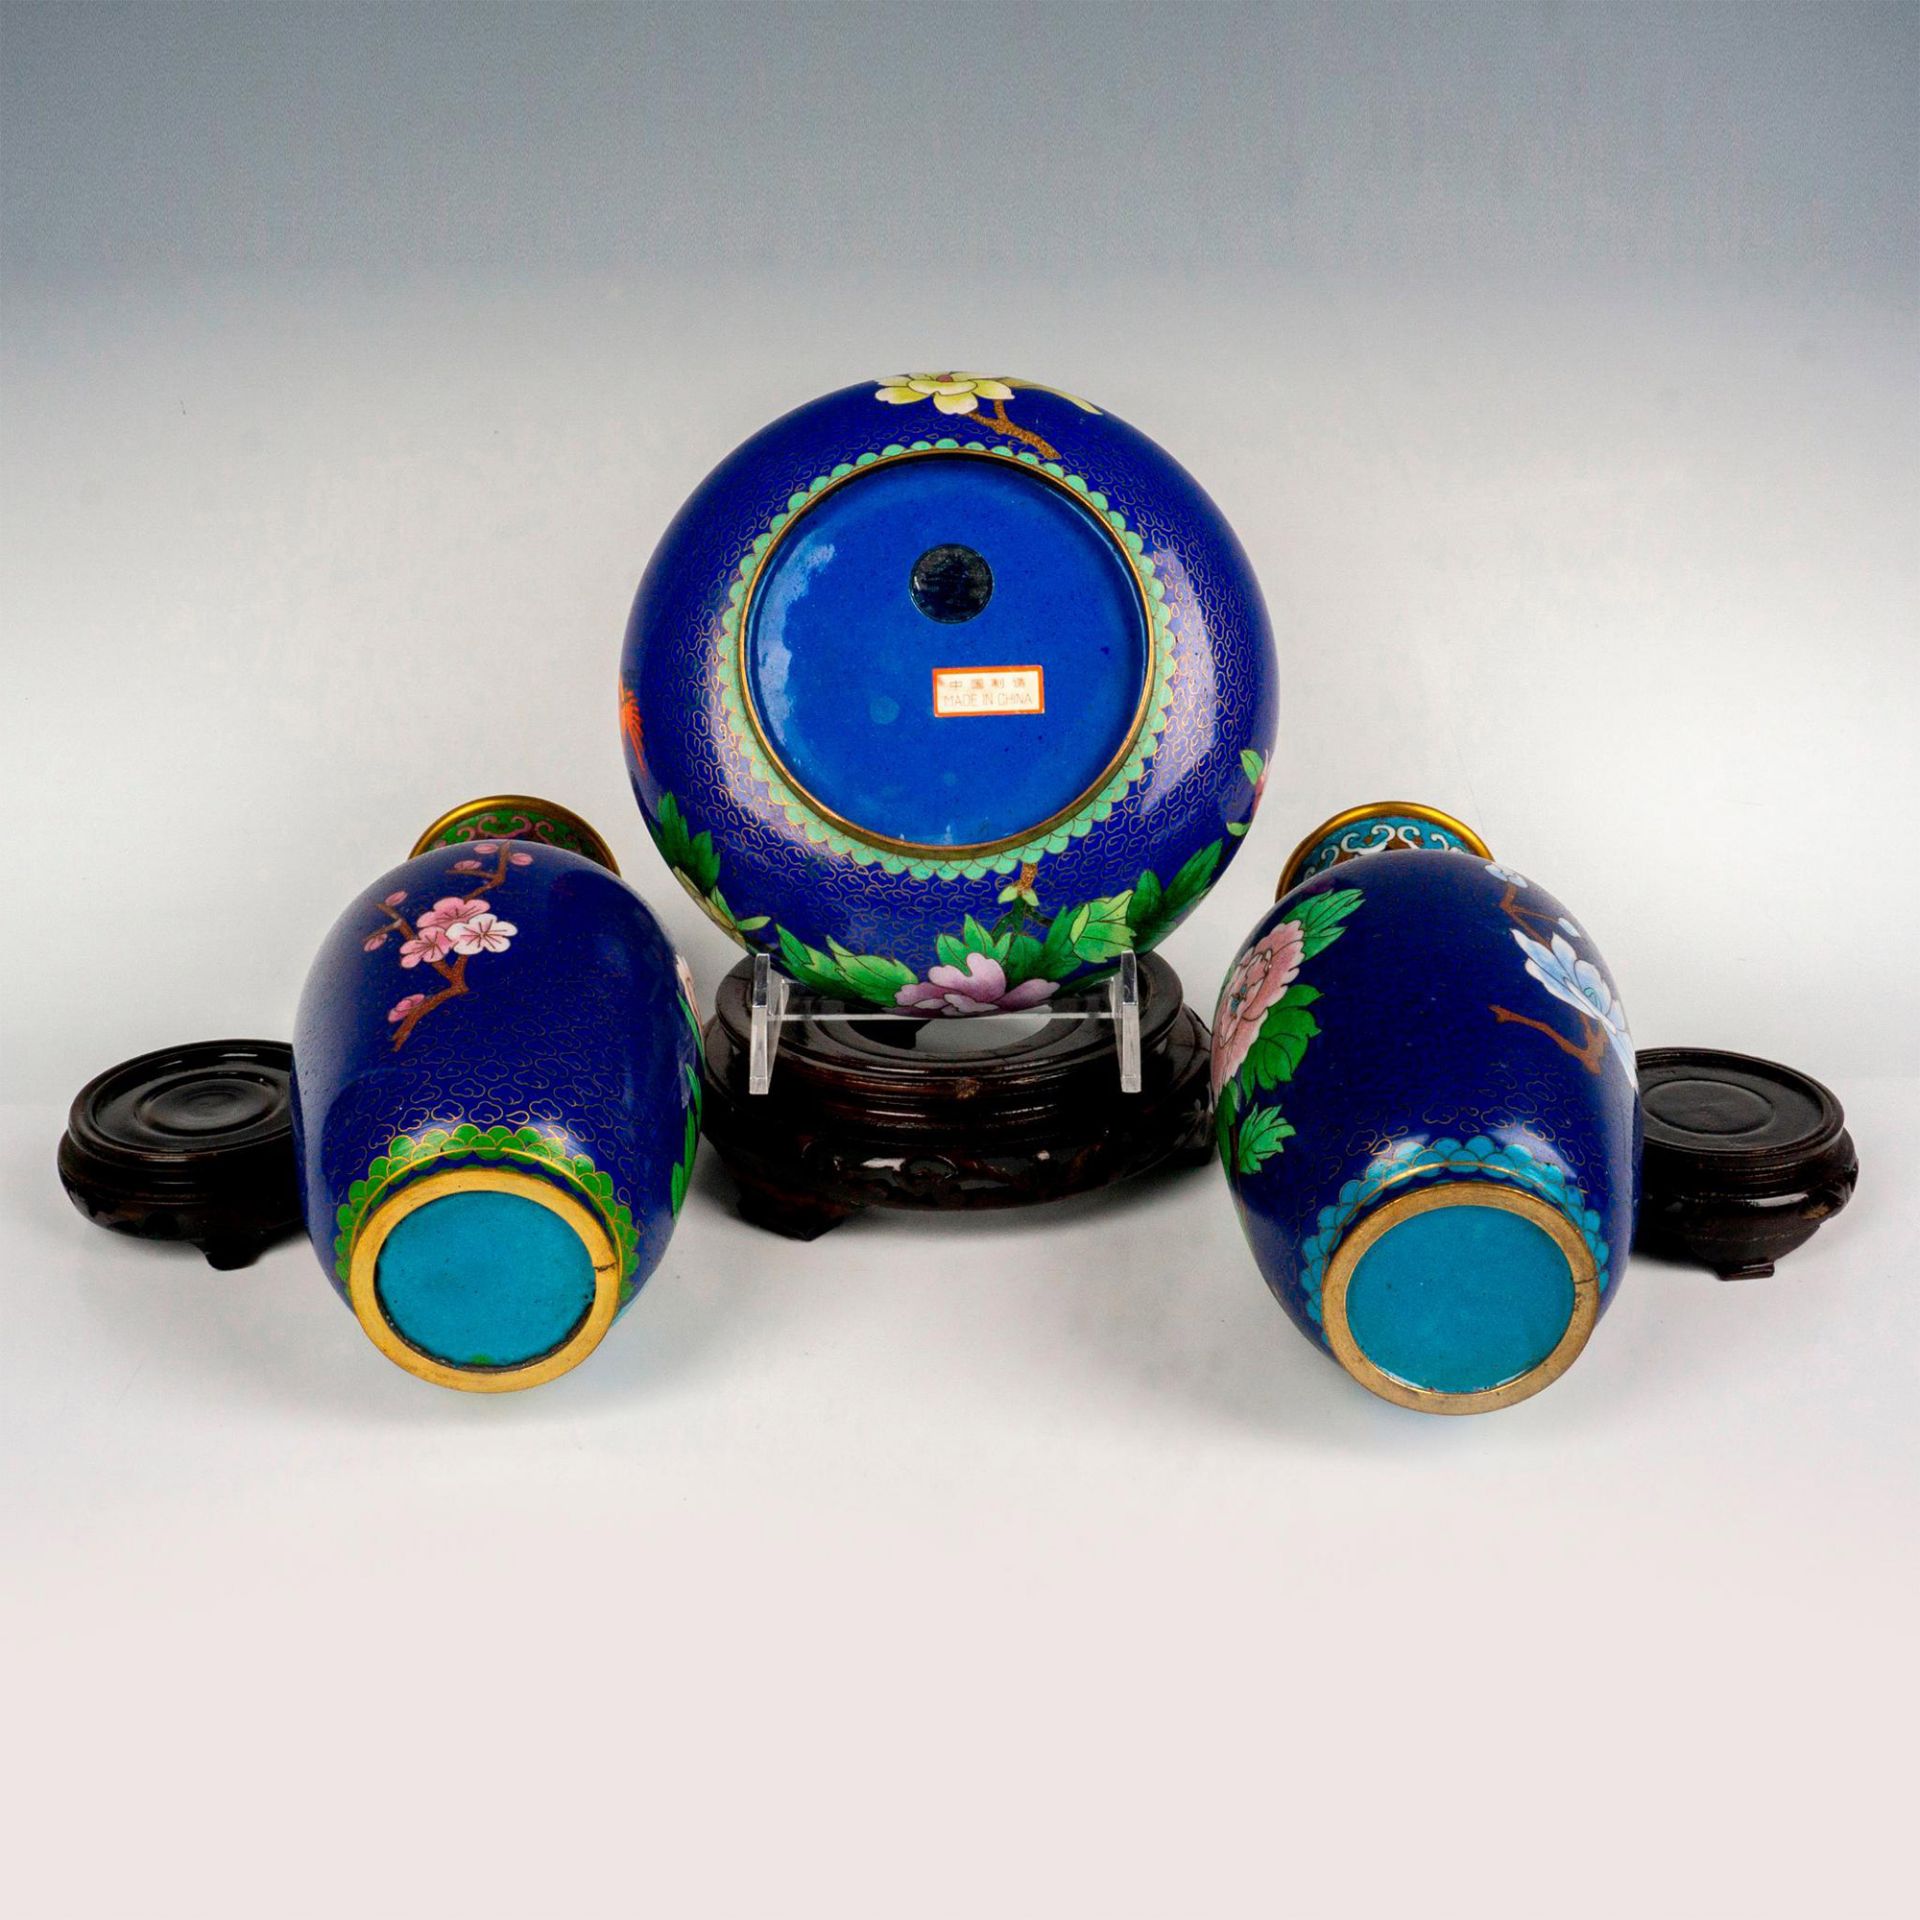 3pc Zi Jin Cheng Chinese Blue Cloisonne Vases - Image 3 of 3